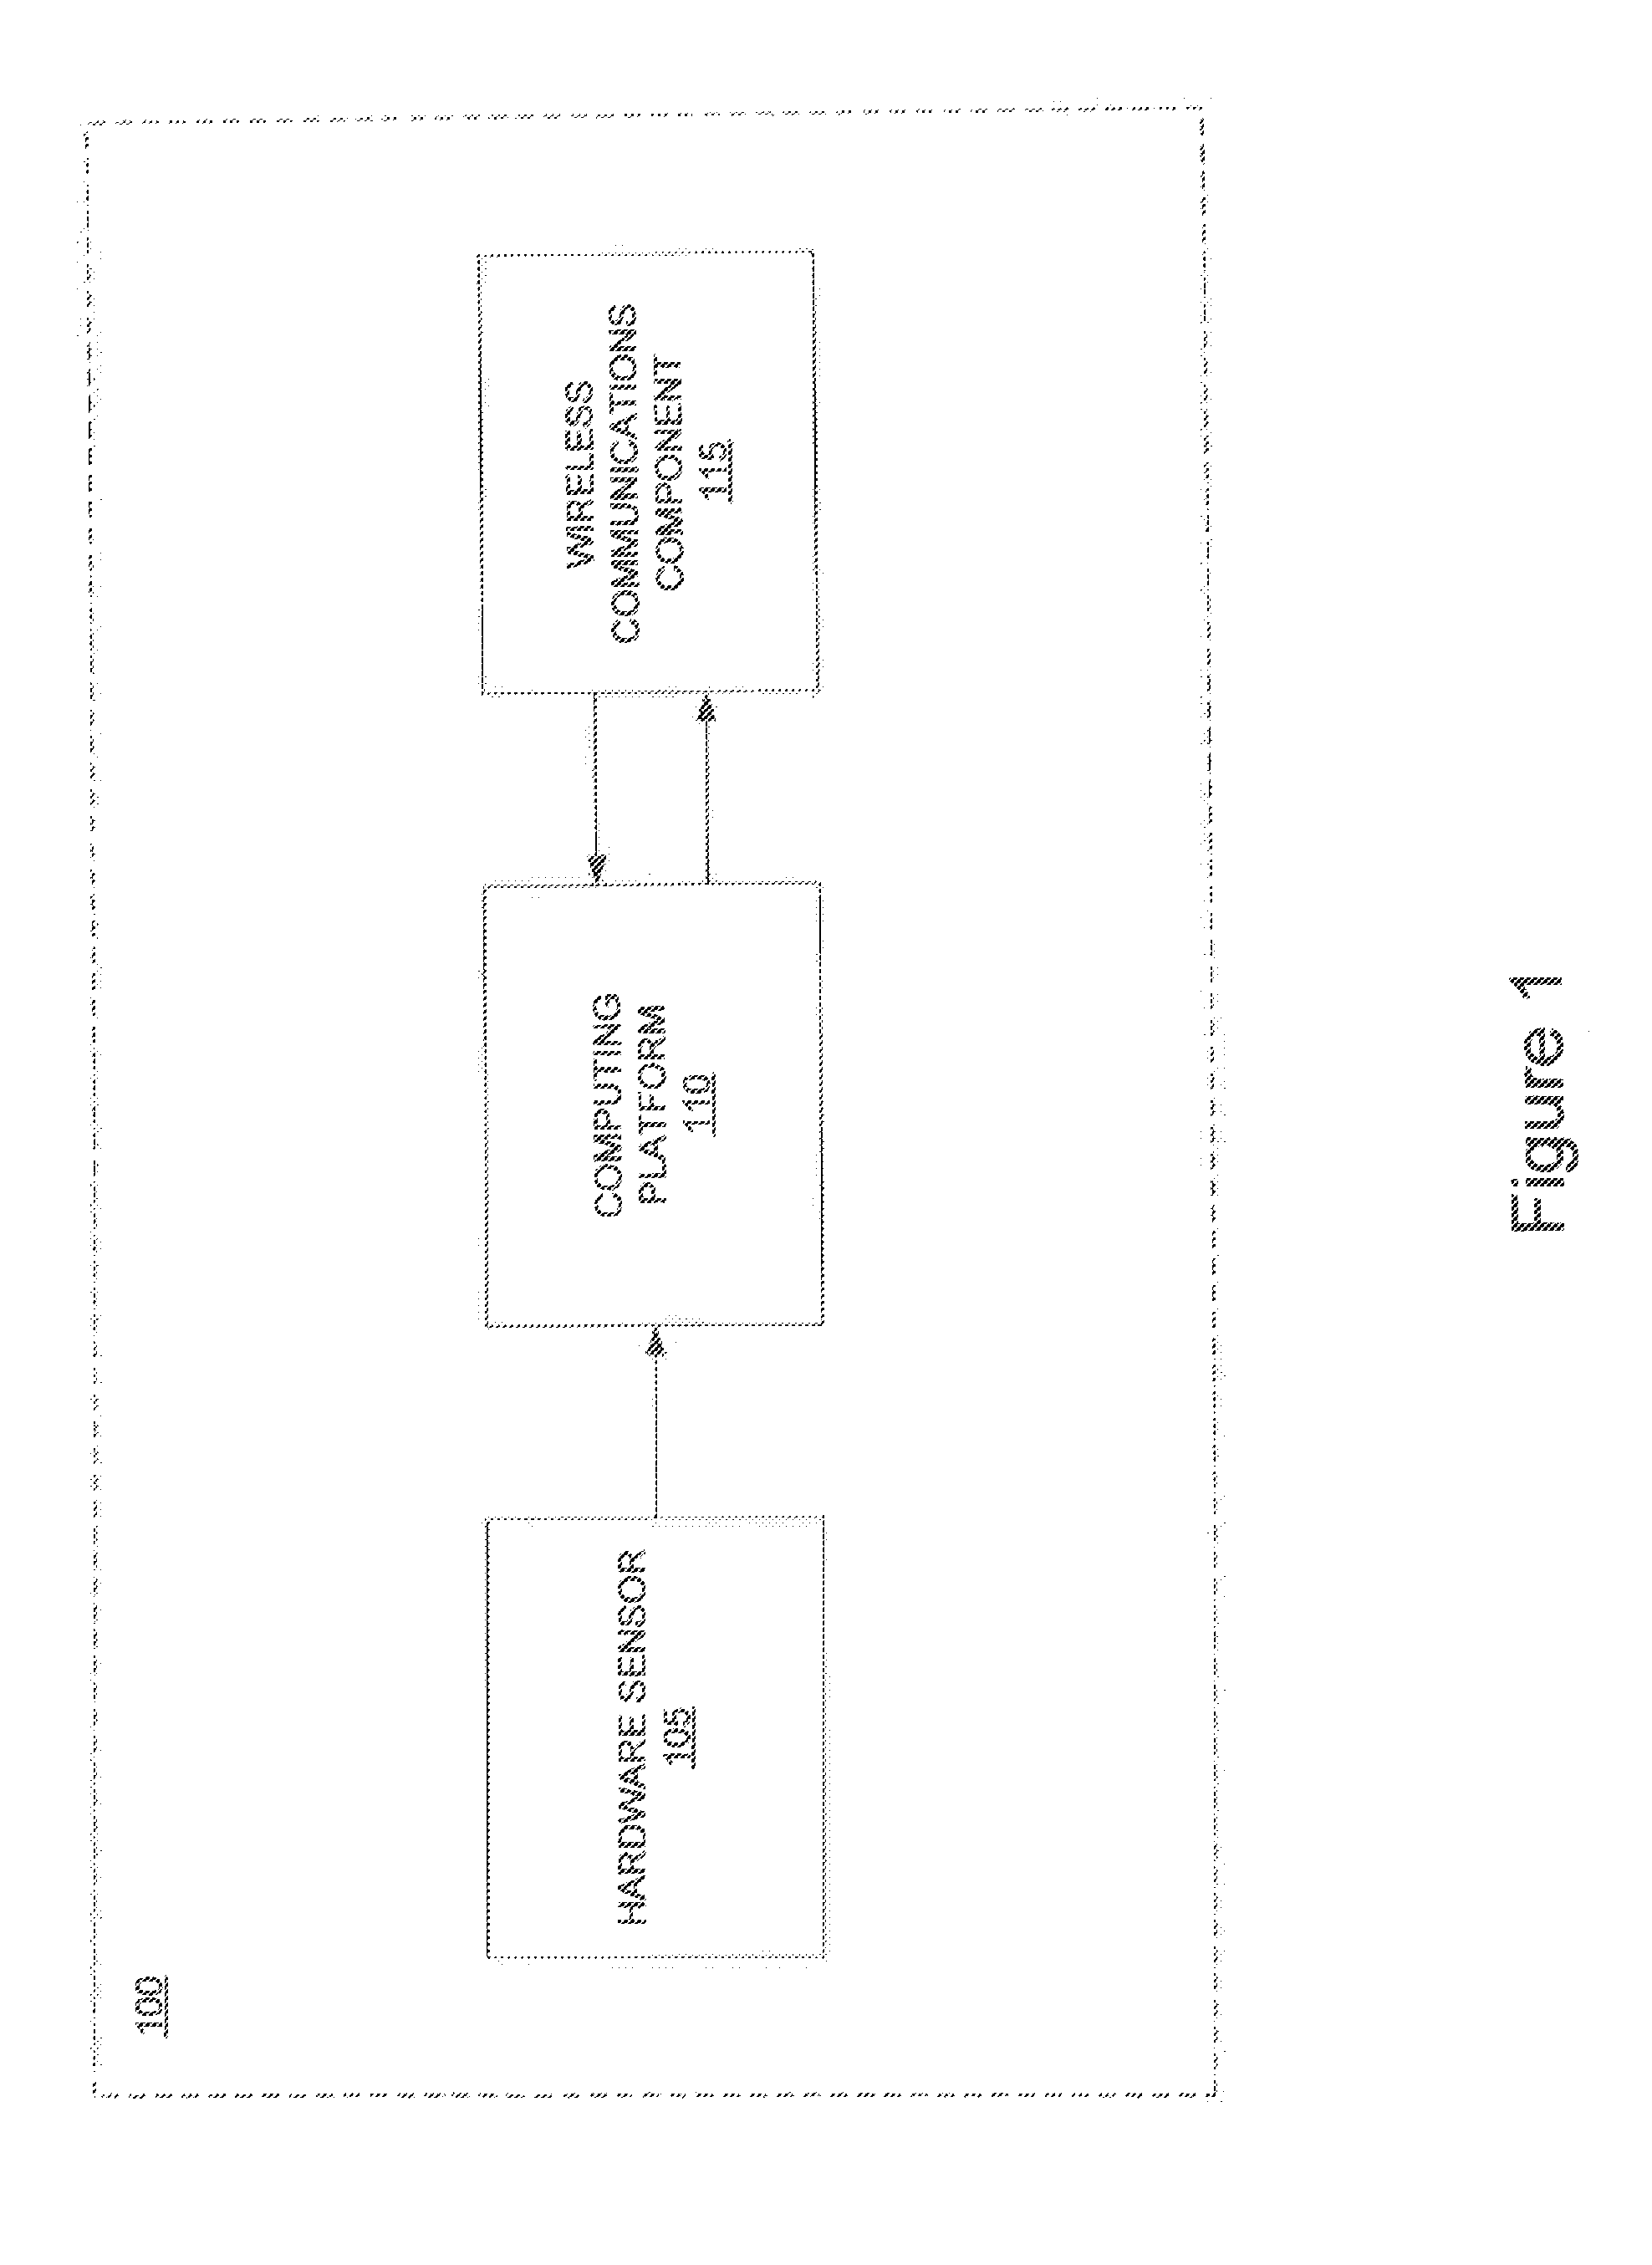 System and method for performing a secure cryptographic operation on a mobile device using an entropy pool